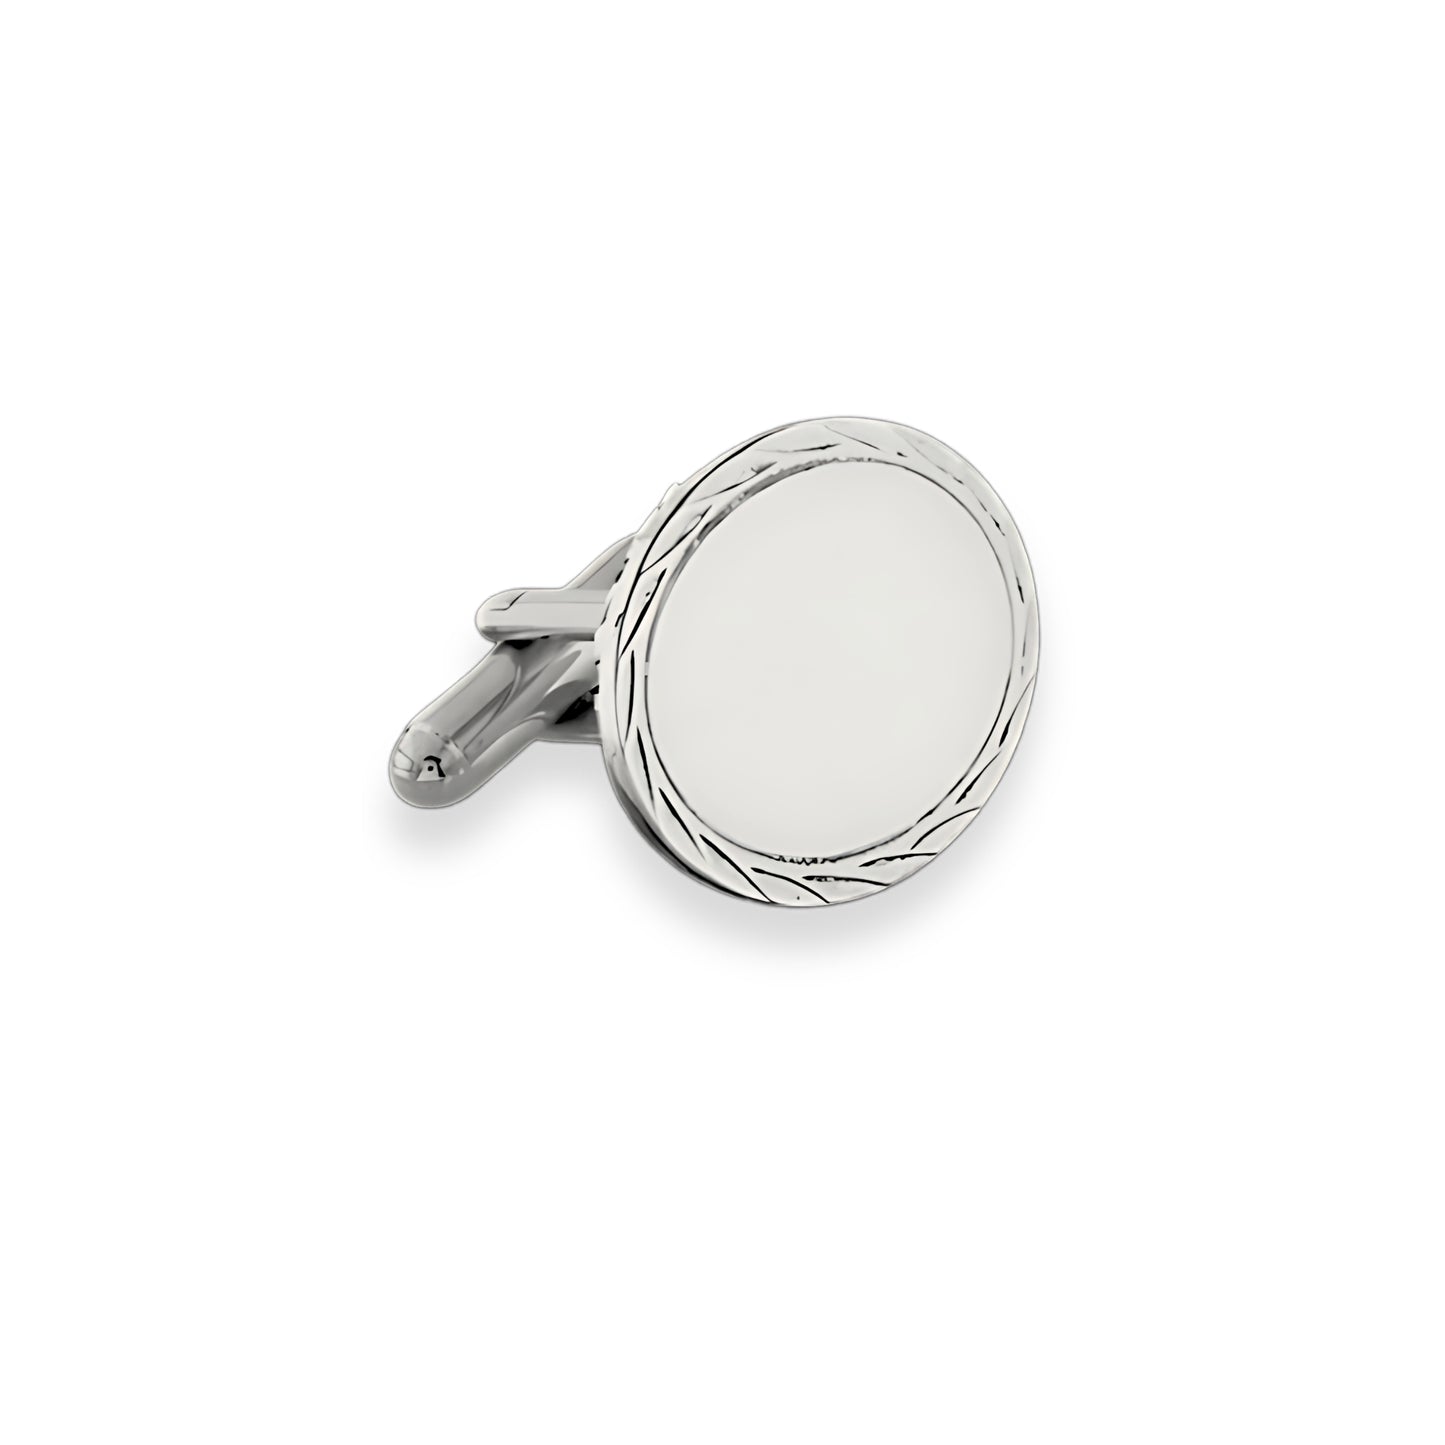 Sterling Silver Oval Cufflinks with Feathered Edge